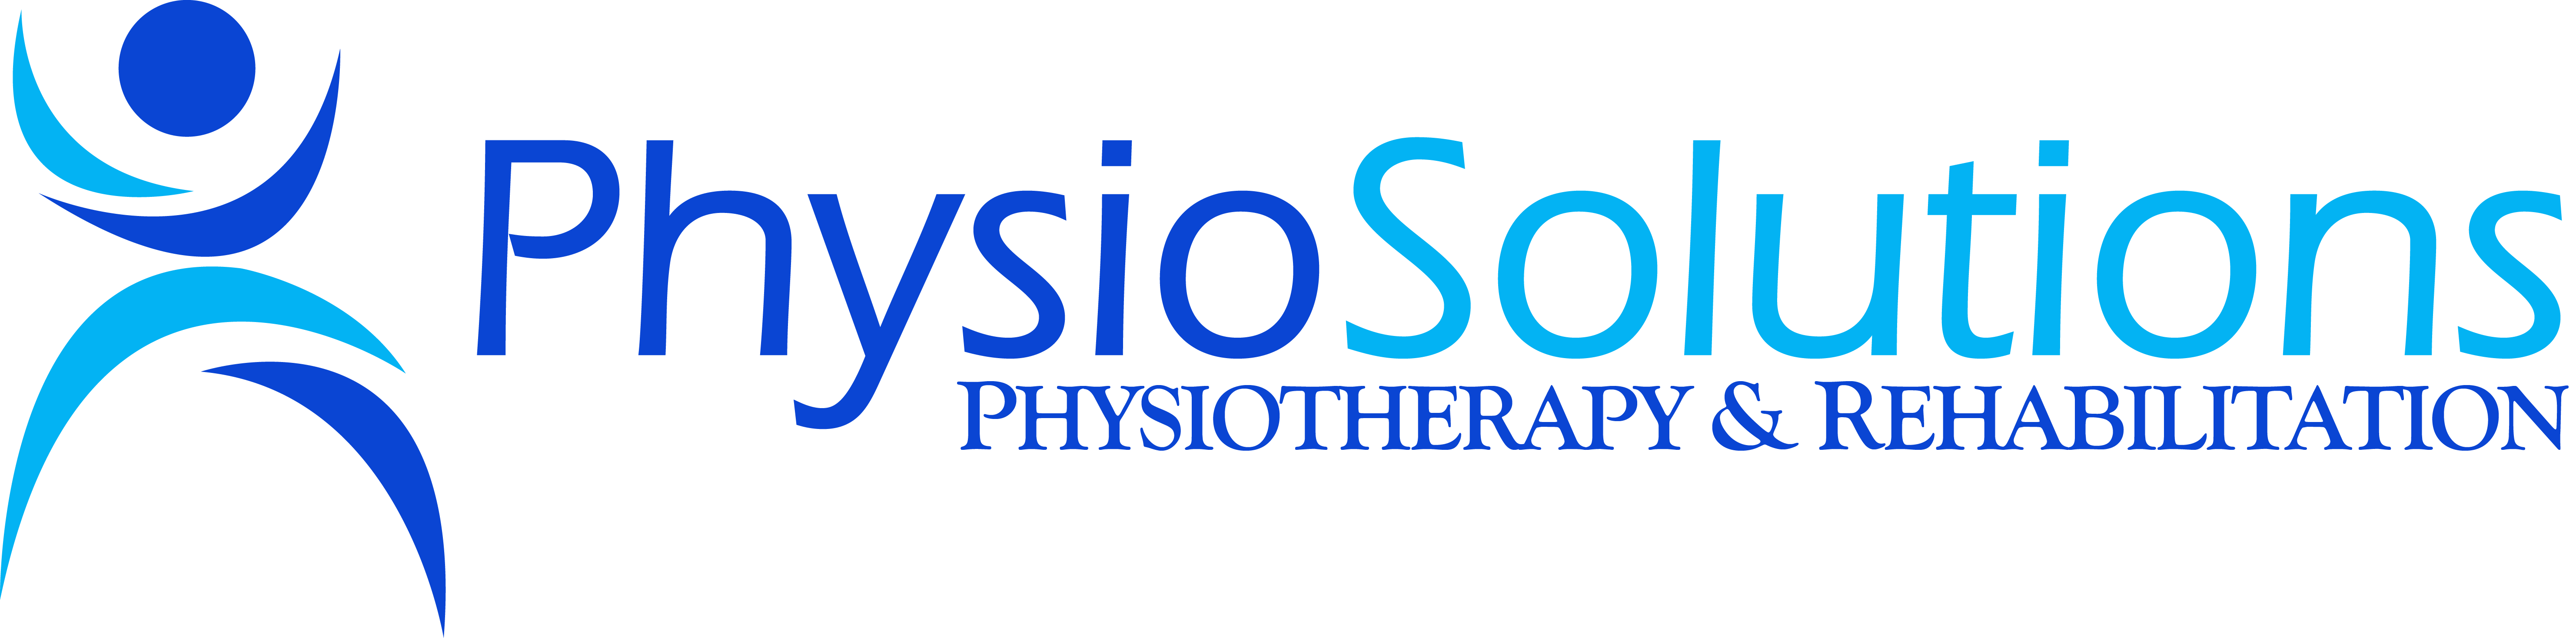 Physiotherapists Home Tillicoultry | PhysioSolutions